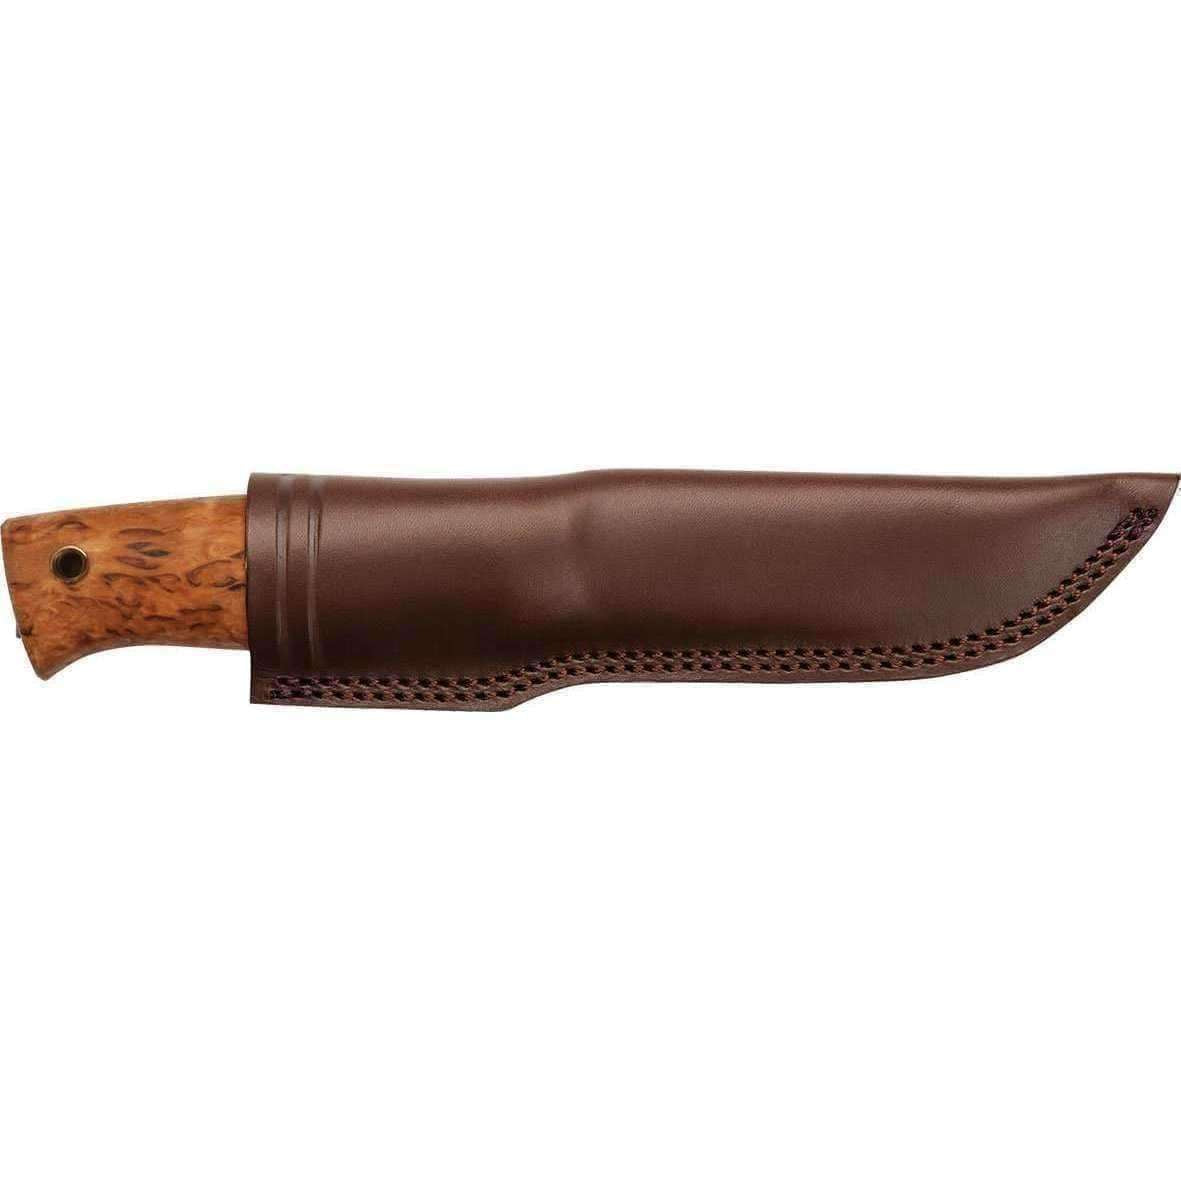 Helle, Helle Temagami Knife, Fixed Blade Bushcraft Knives, Wylies Outdoor World,